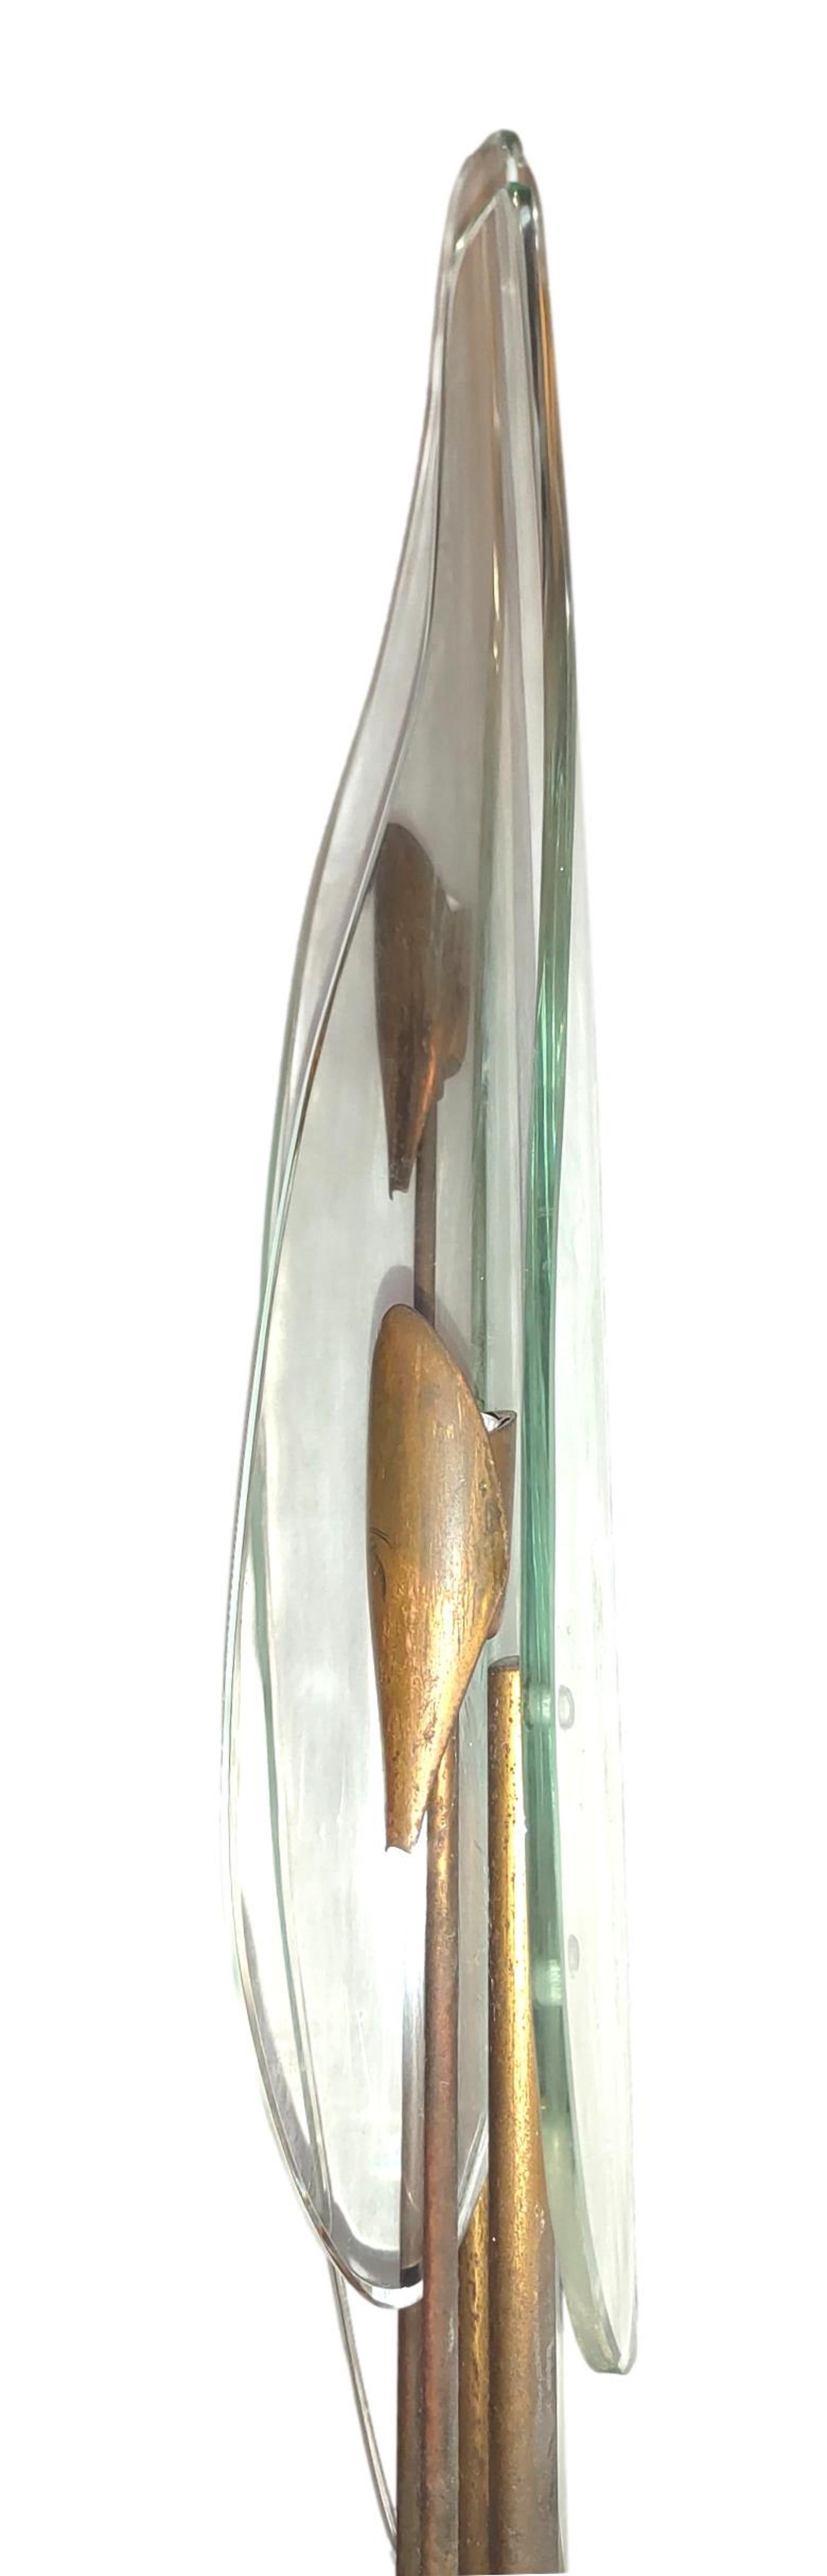 Wonderful 1461 model wall lamp, designed by max ingrand for Fontana Arte, in Italy, circa 1950.
Made of brass with double transparent Murano glass with green reflections. 
It measures 75 centimeters in height, in very good conservation conditions,